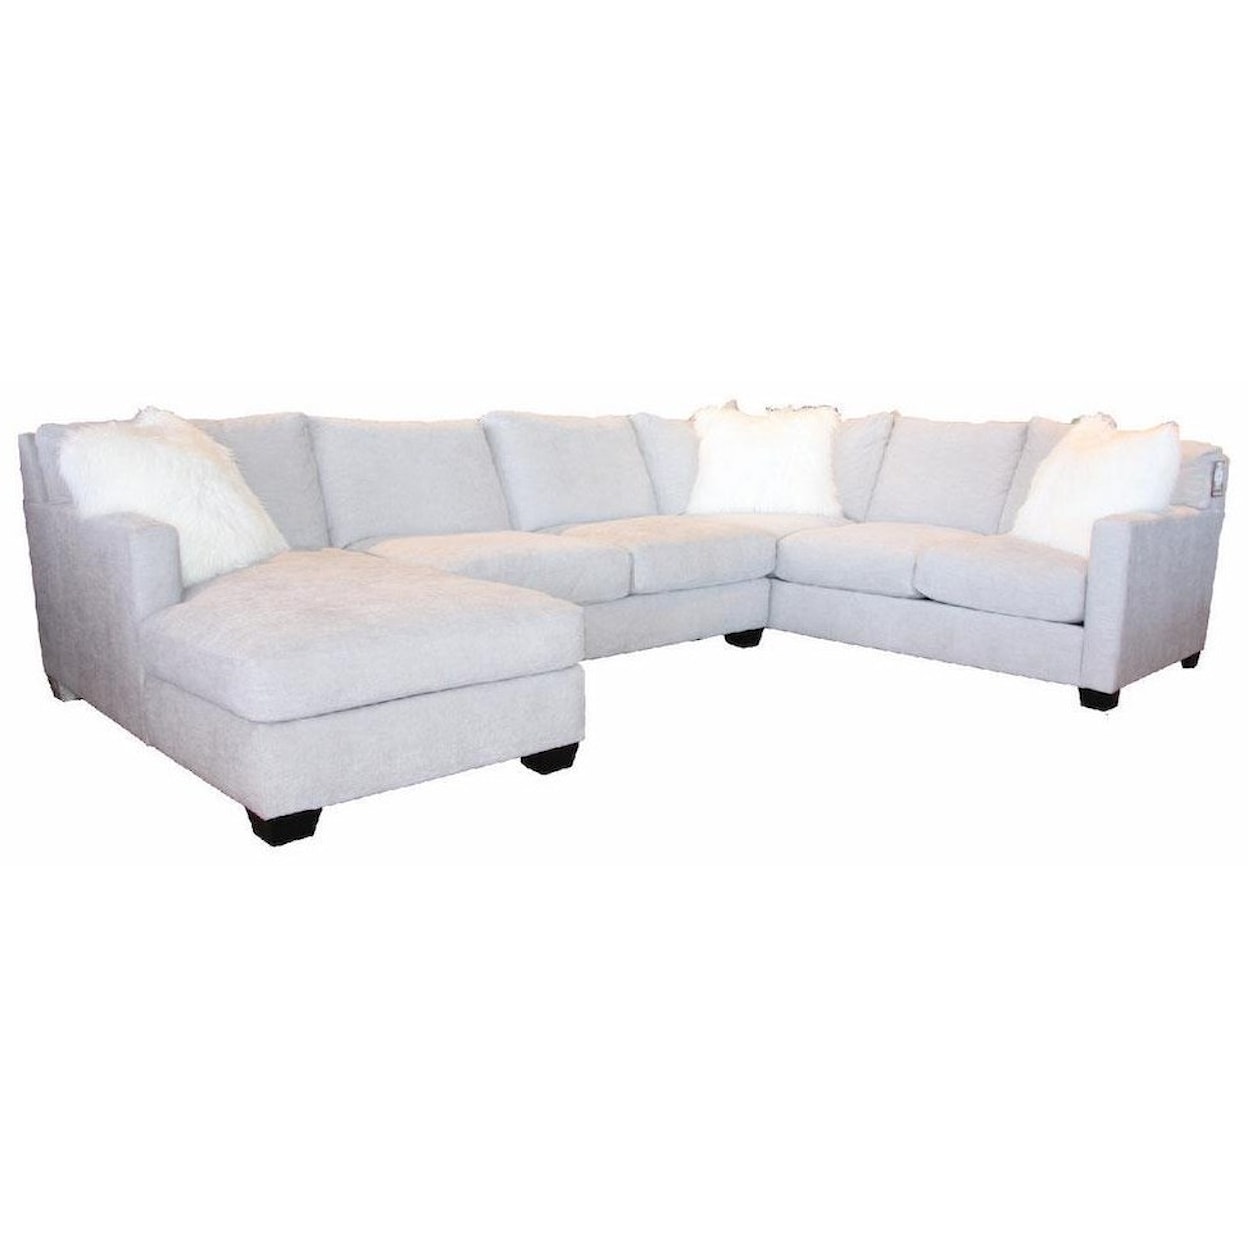 JMD Furniture 1300 1300-3 PC Down Chaise Sectional